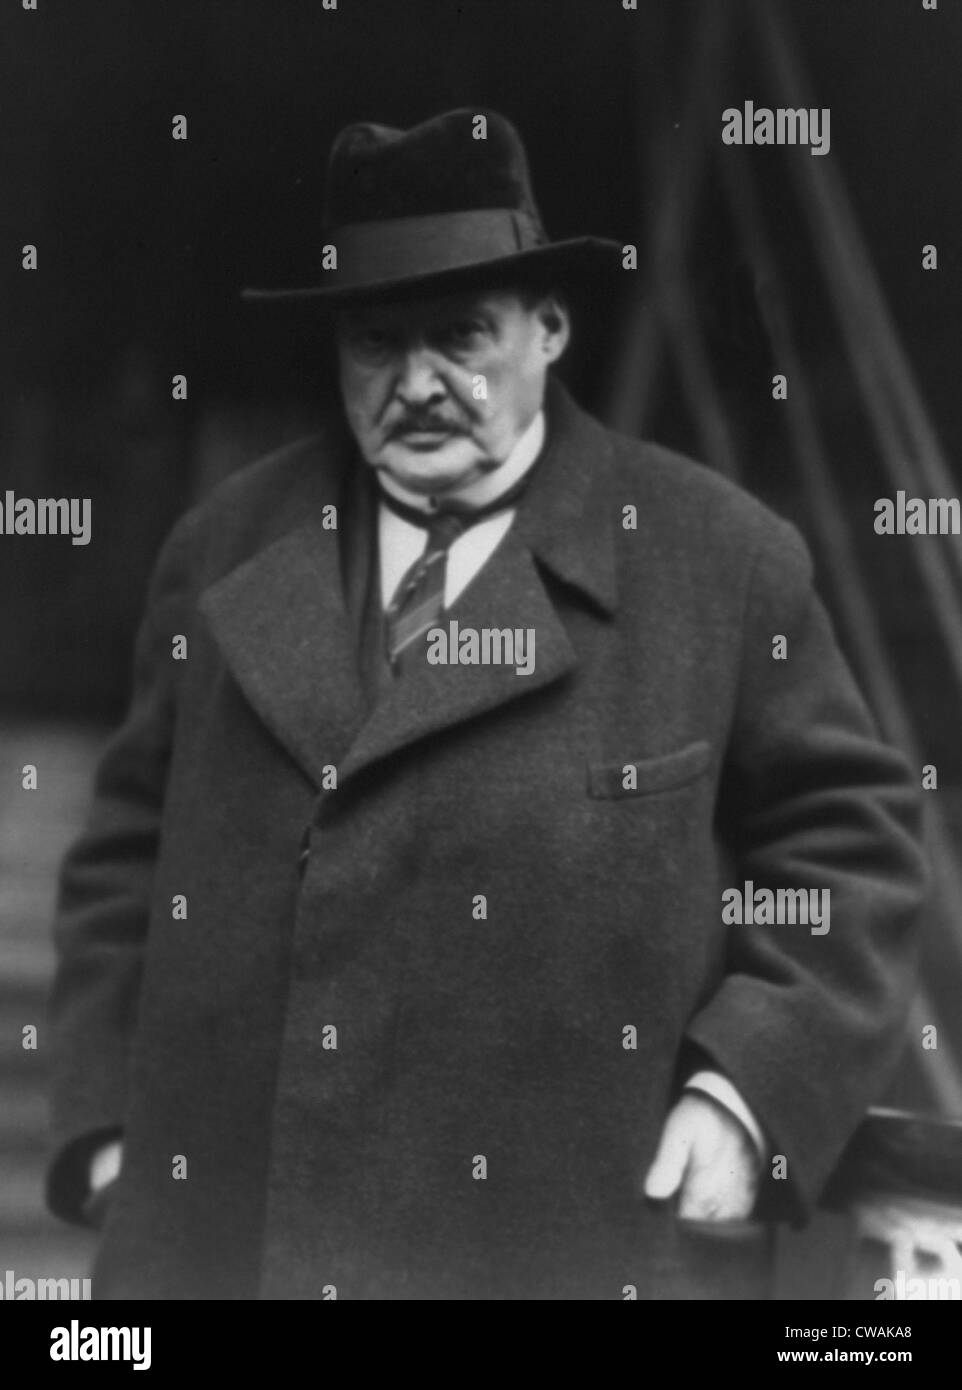 Alesandr Glazunov (1865-1936), Russian composer of symphonies and ballets after his 1928 emigration to Paris. He was the Stock Photo